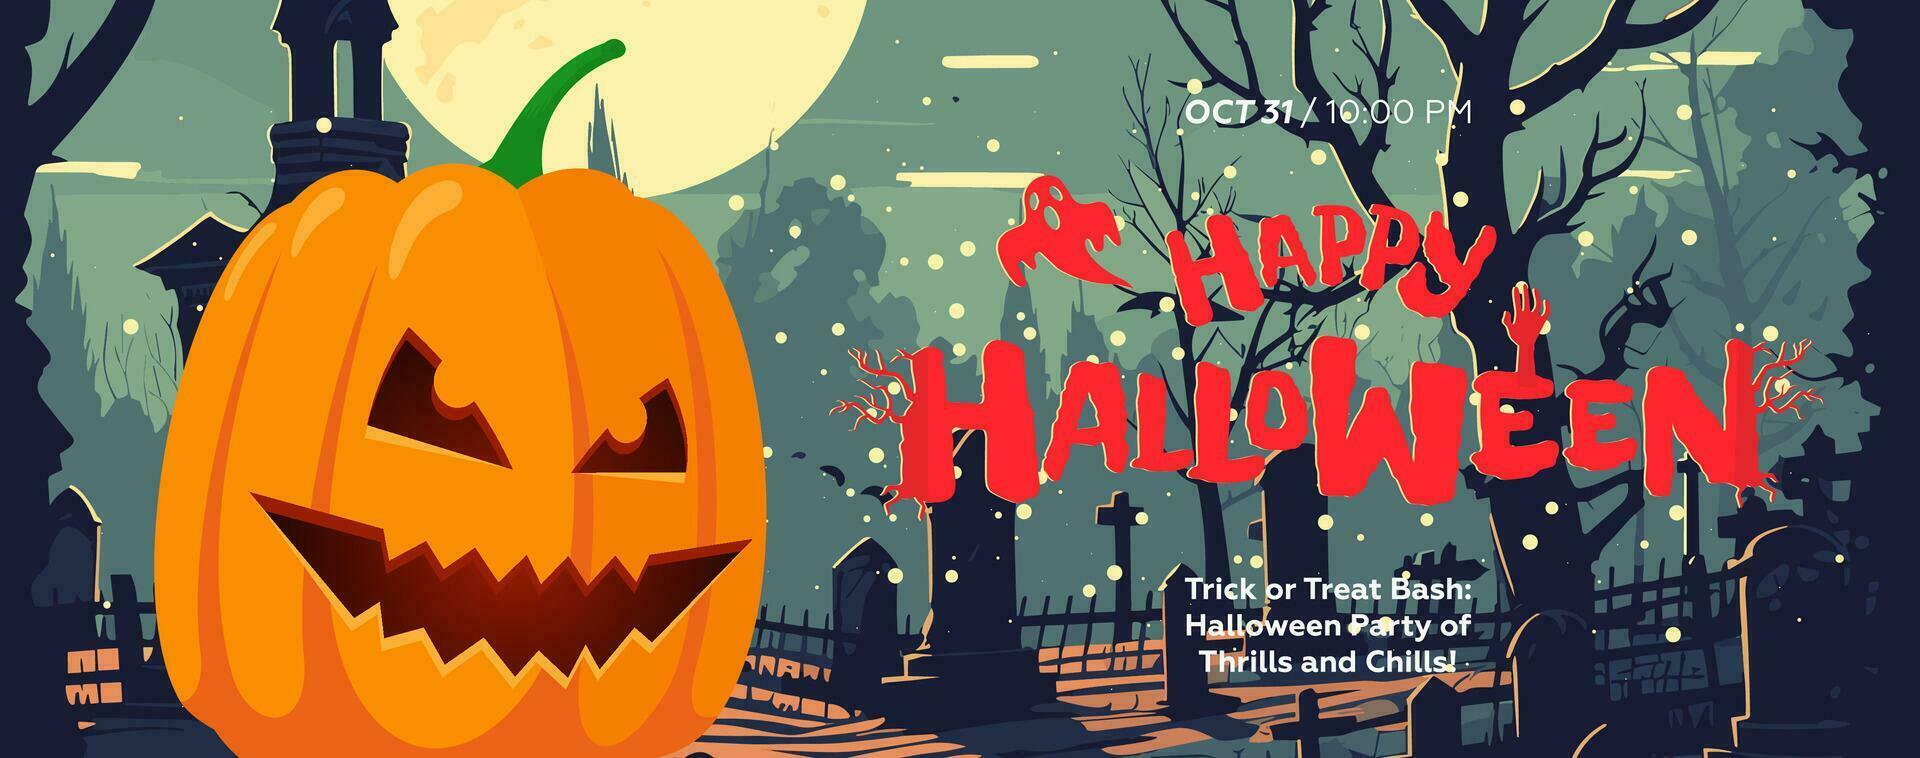 Happy Halloween All Saints night banner with spooky face pumpkin in graveyard. Horizontal art poster scary Jack-o-lantern in cemetery. Holiday promo invitation flyer. Typography artwork card template vector